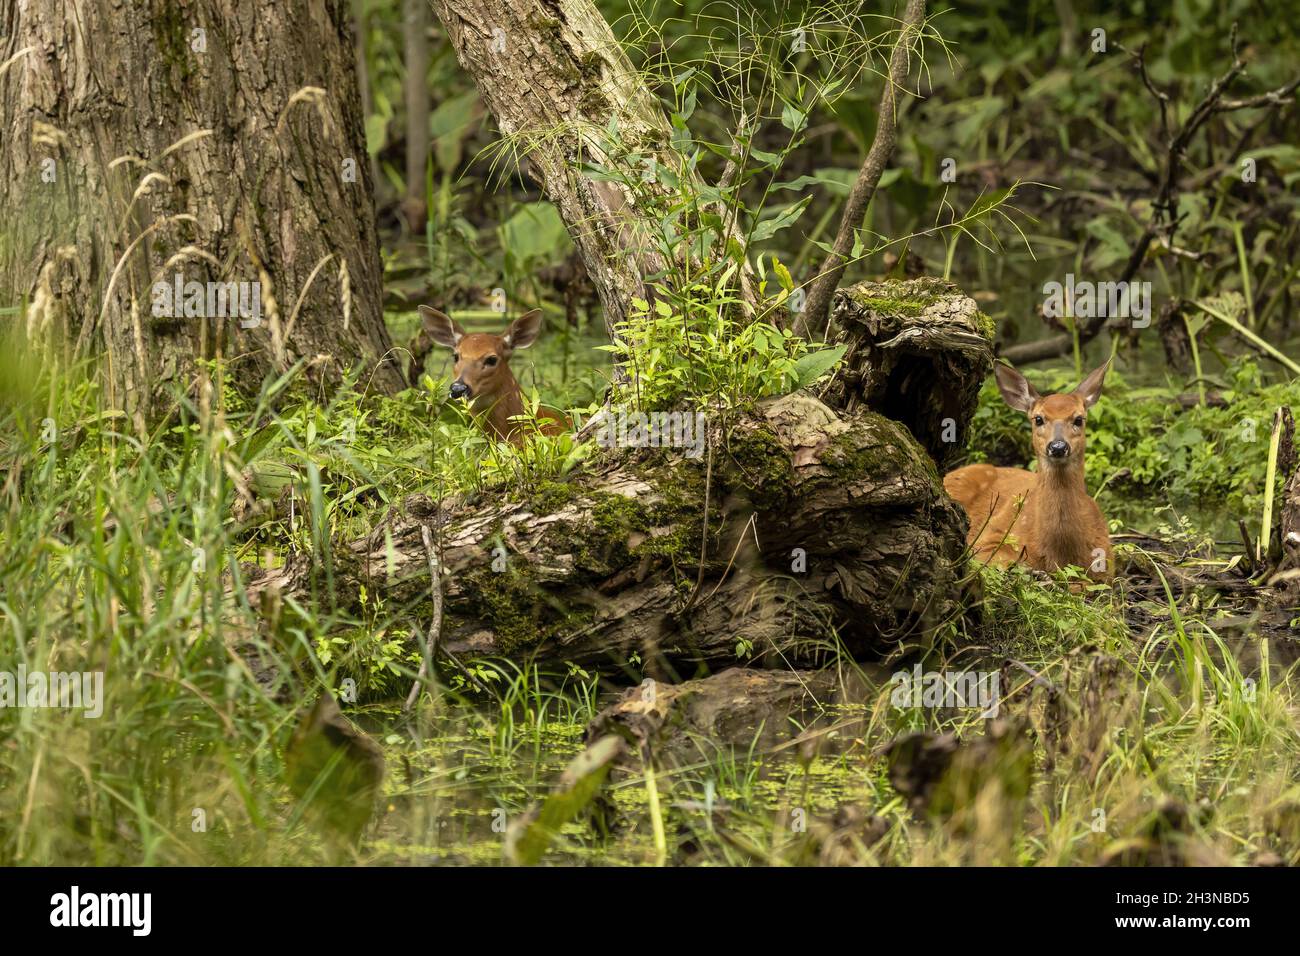 The White-tailed deer. Natural scene from Wisconsin state forest. Stock Photo